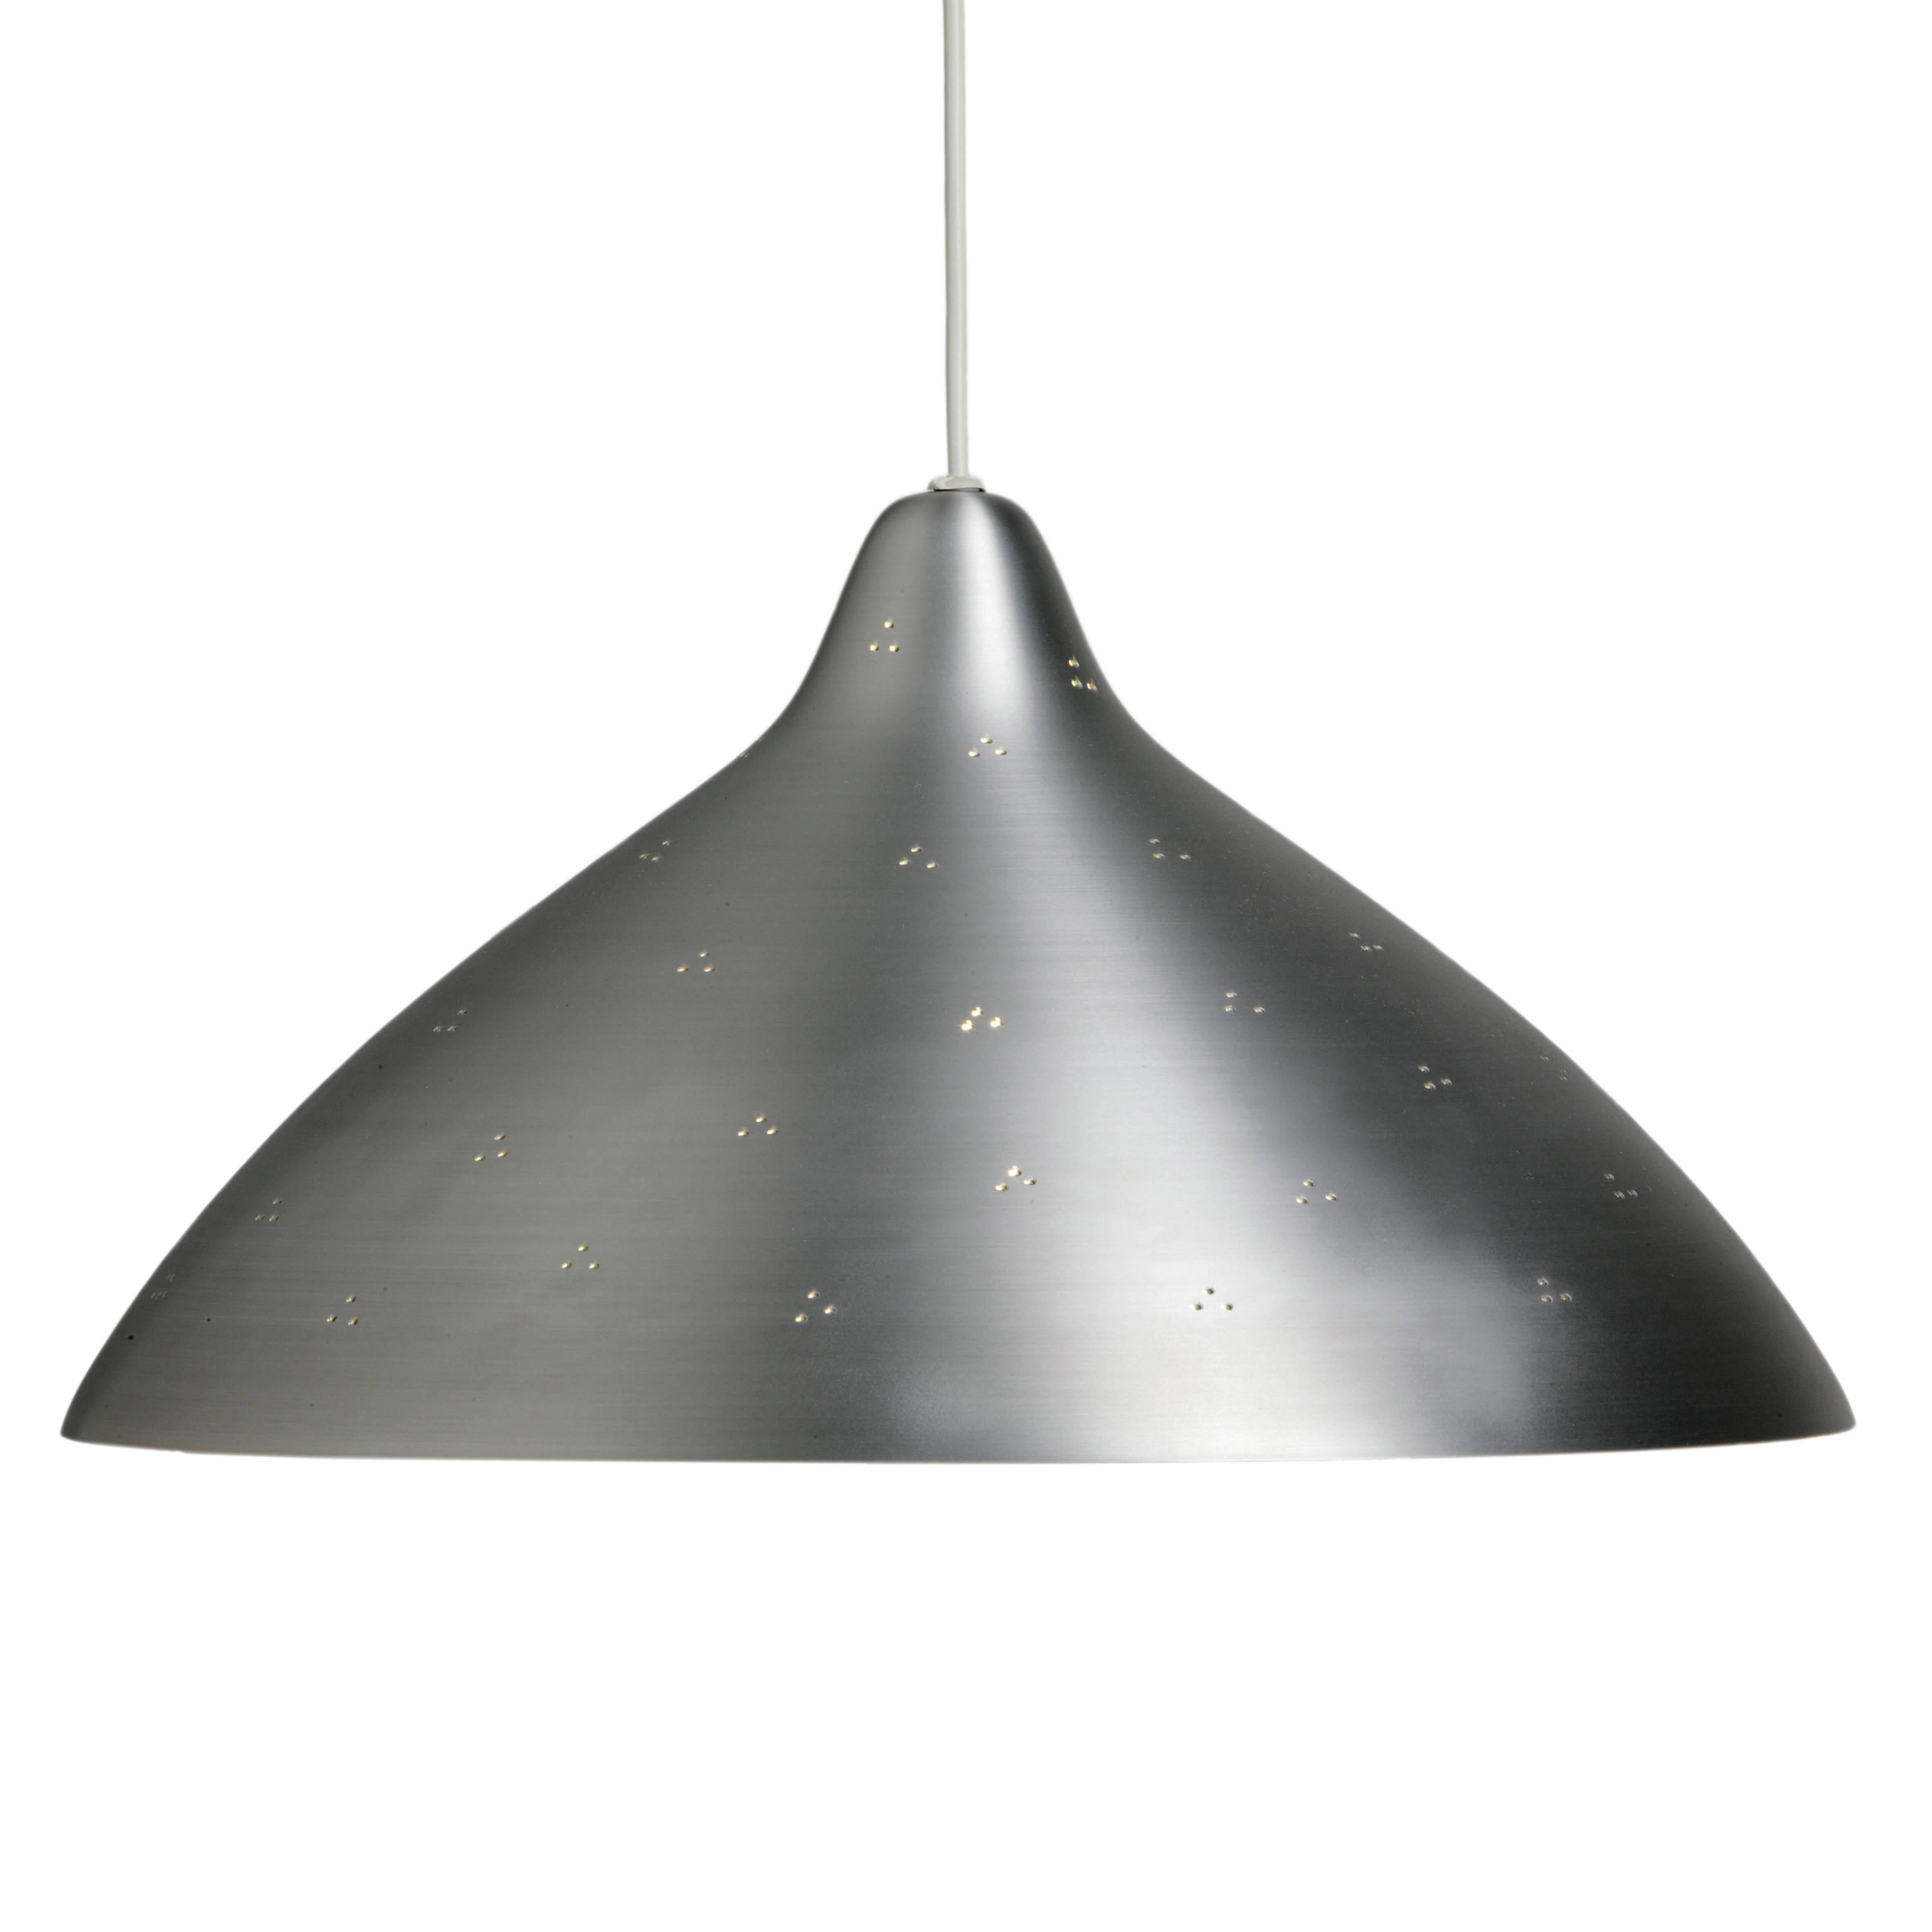 Lisa Johansson-Pape large silver perforated 'Hat' metal pendant for Innolux Oy. Originally designed in 1947, these authorized re-editions are true to the original charming simplicity of Pape's iconic design. The white interior of each metallic shade